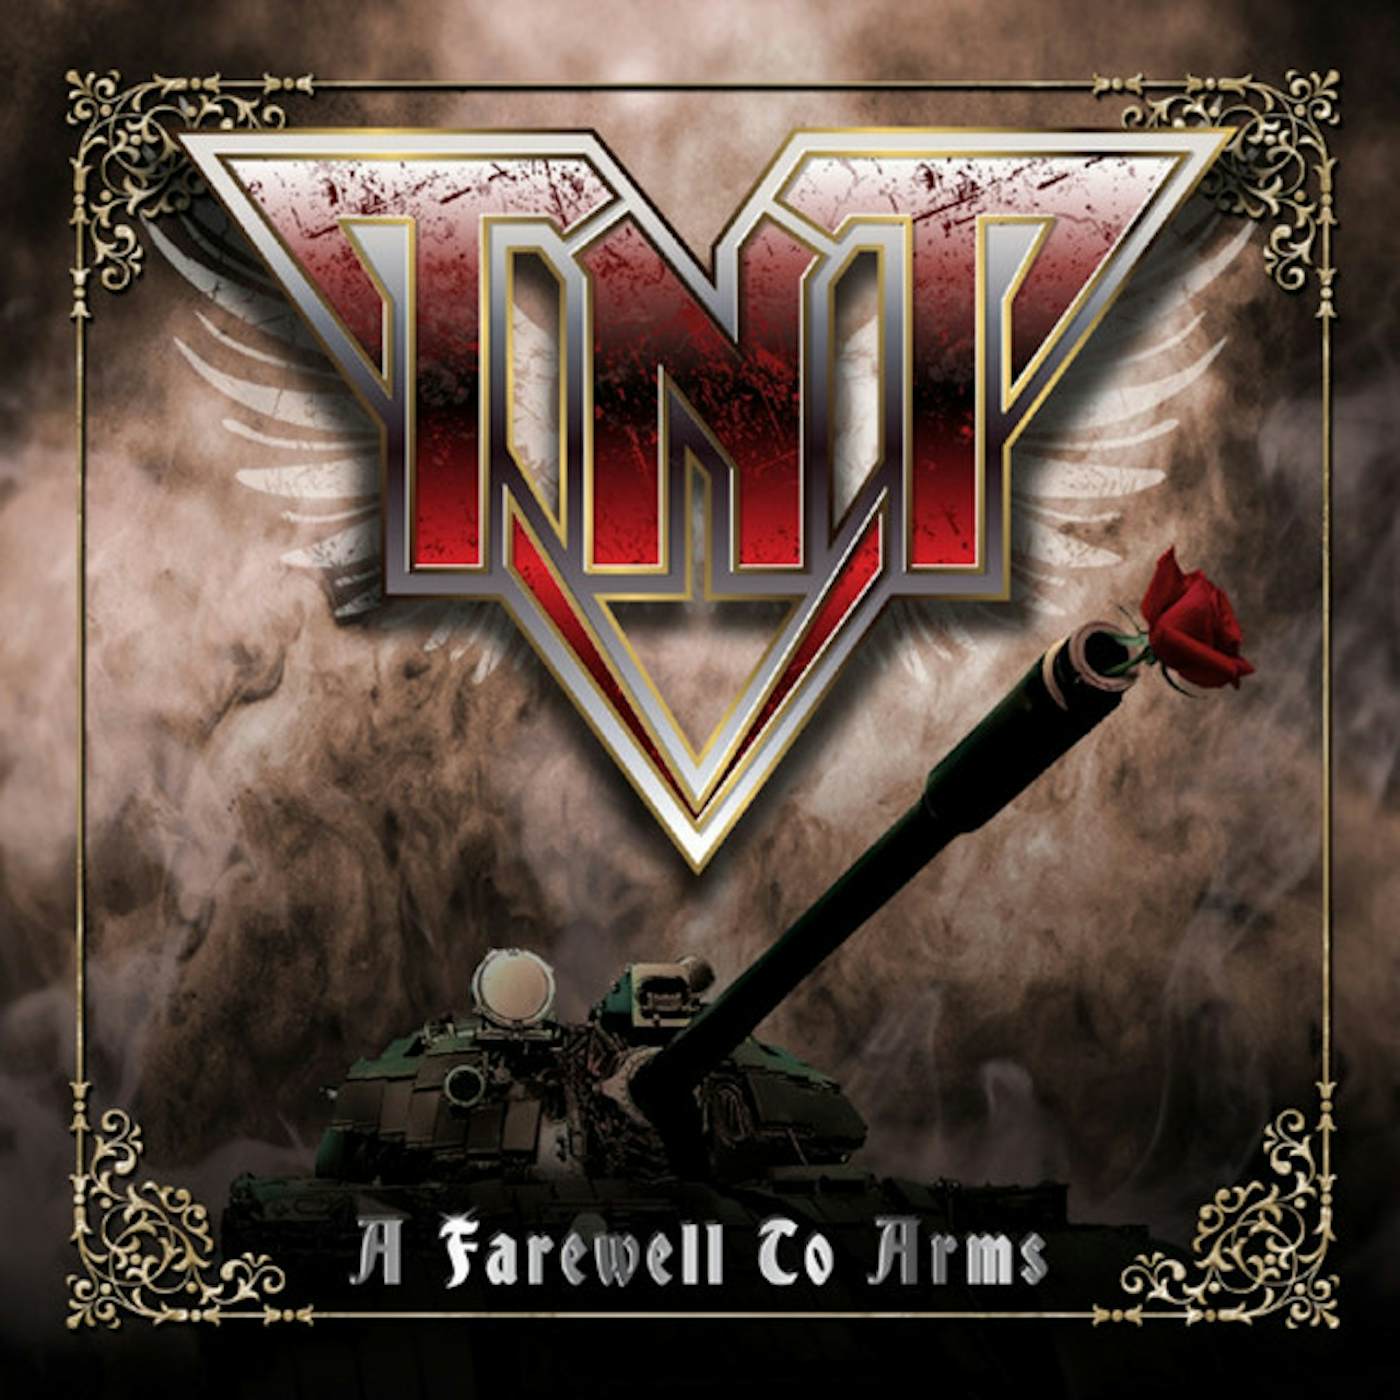 TNT FAREWELL TO ARMS CD